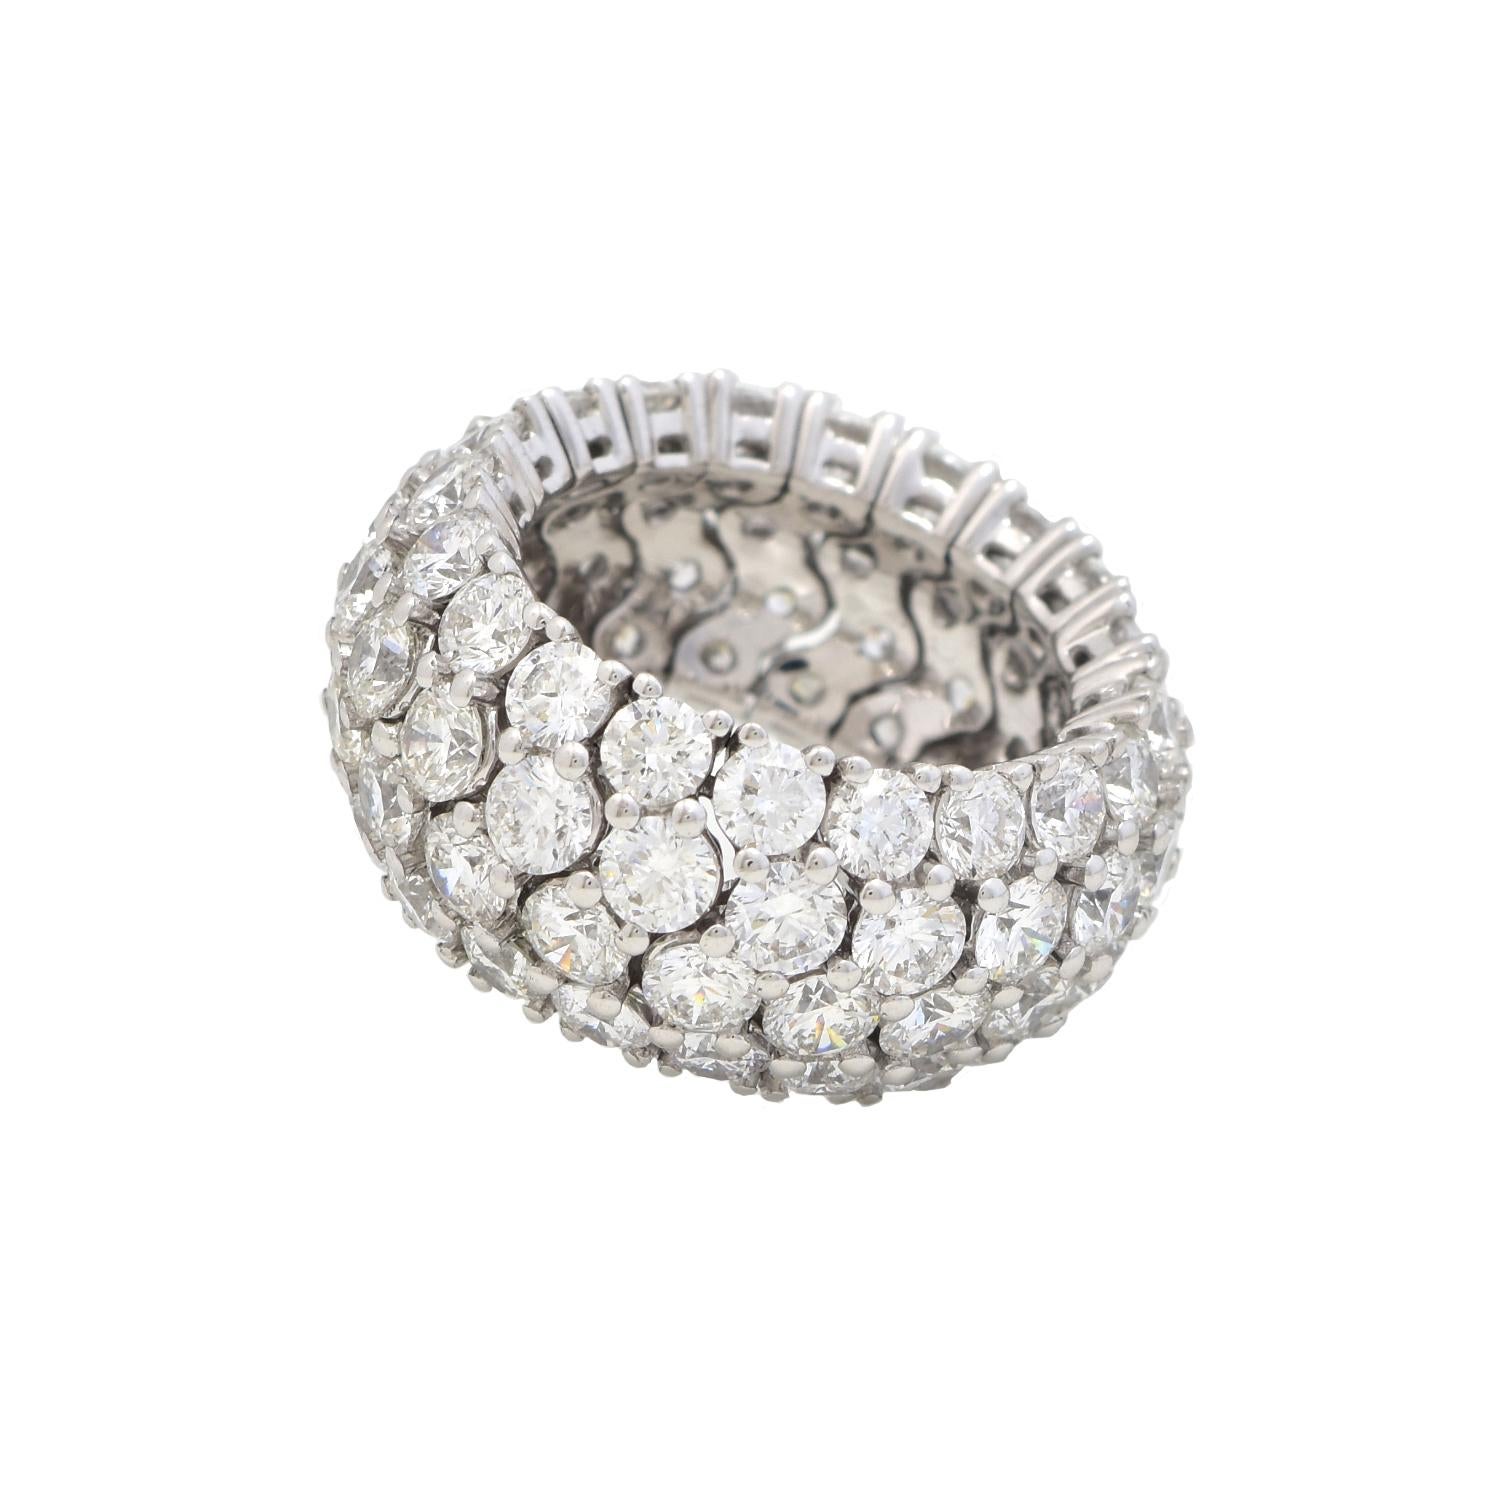 Round Cut De Beers Diamond Four Row Domed Cocktail Ring in 18 Karat White Gold